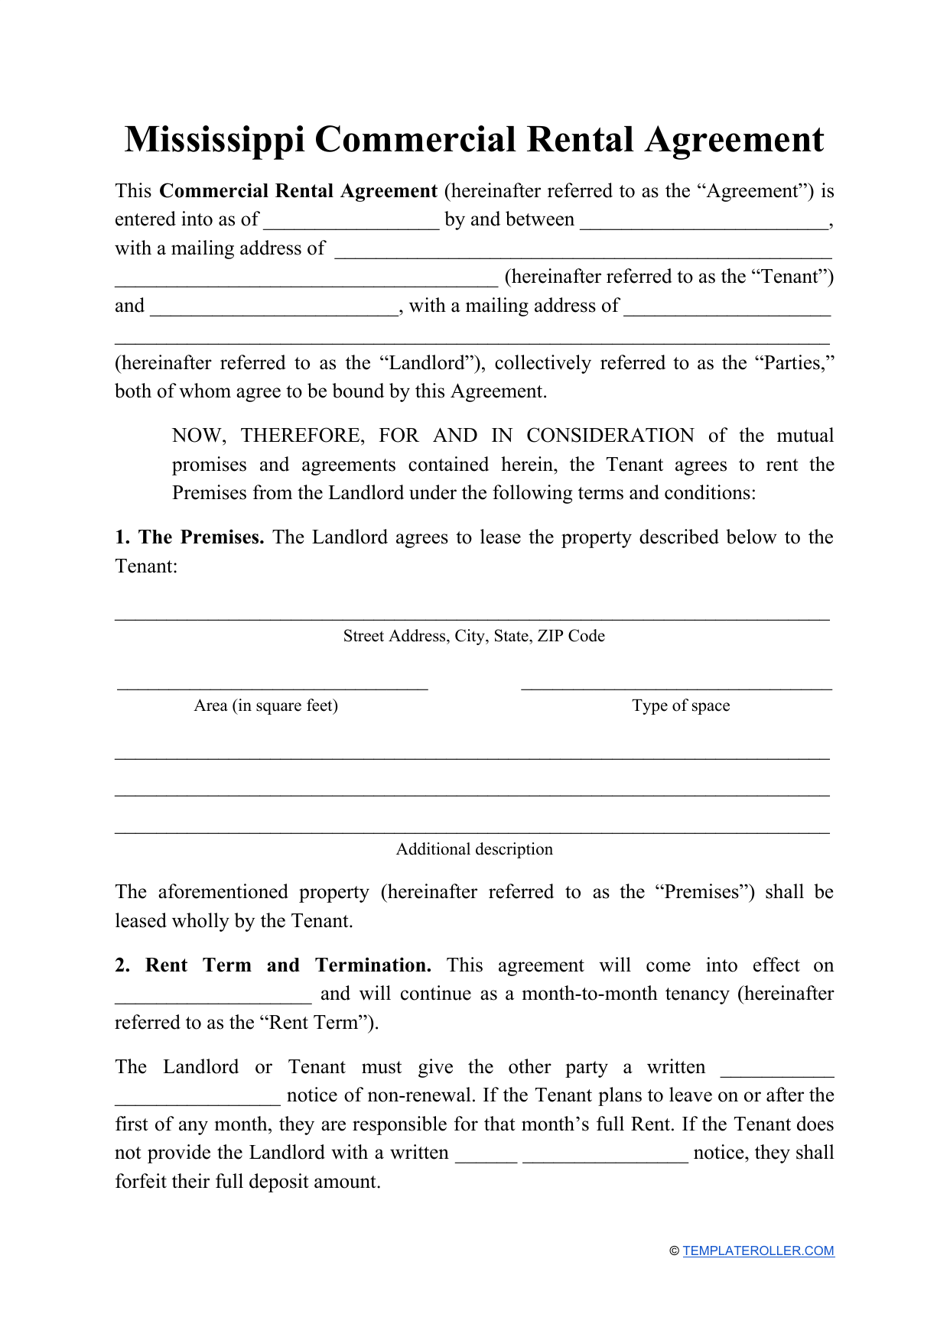 Commercial Rental Agreement Template - Mississippi, Page 1